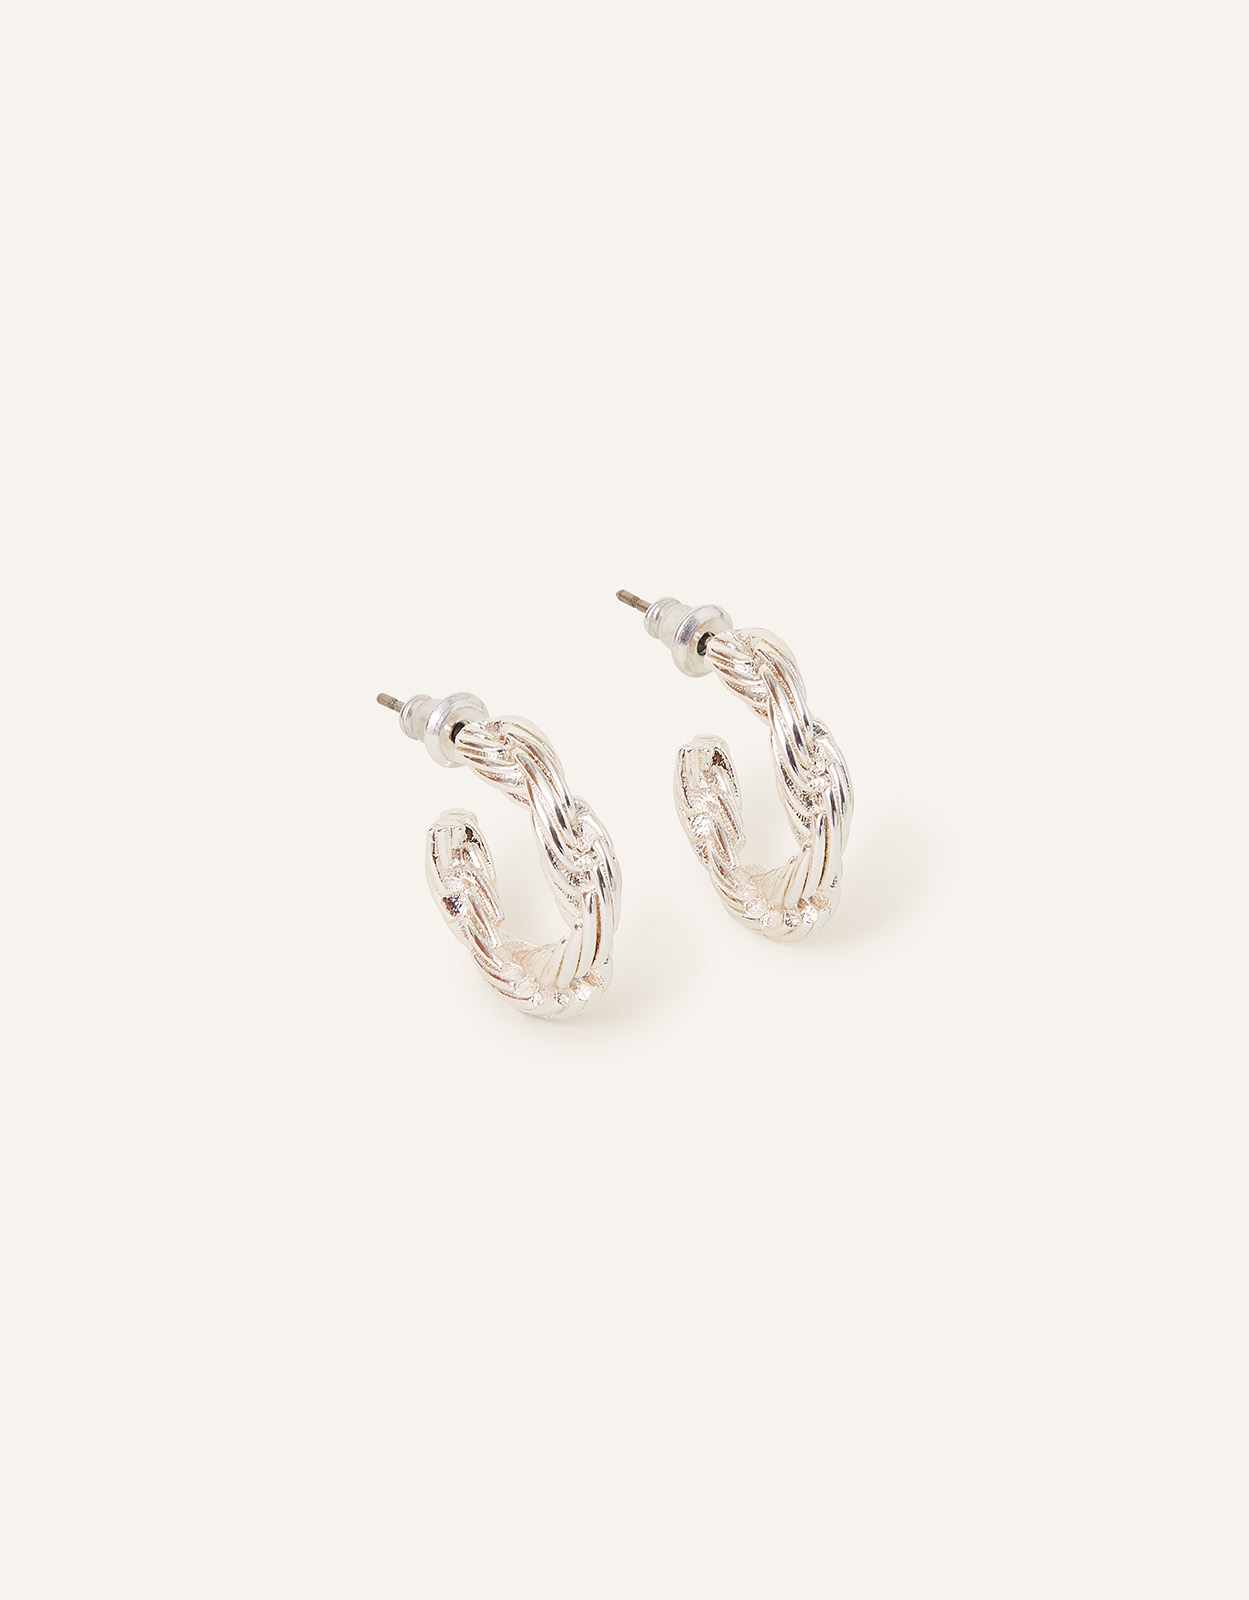 Accessorize Women's Sterling Silver-Plated Twisted Hoops